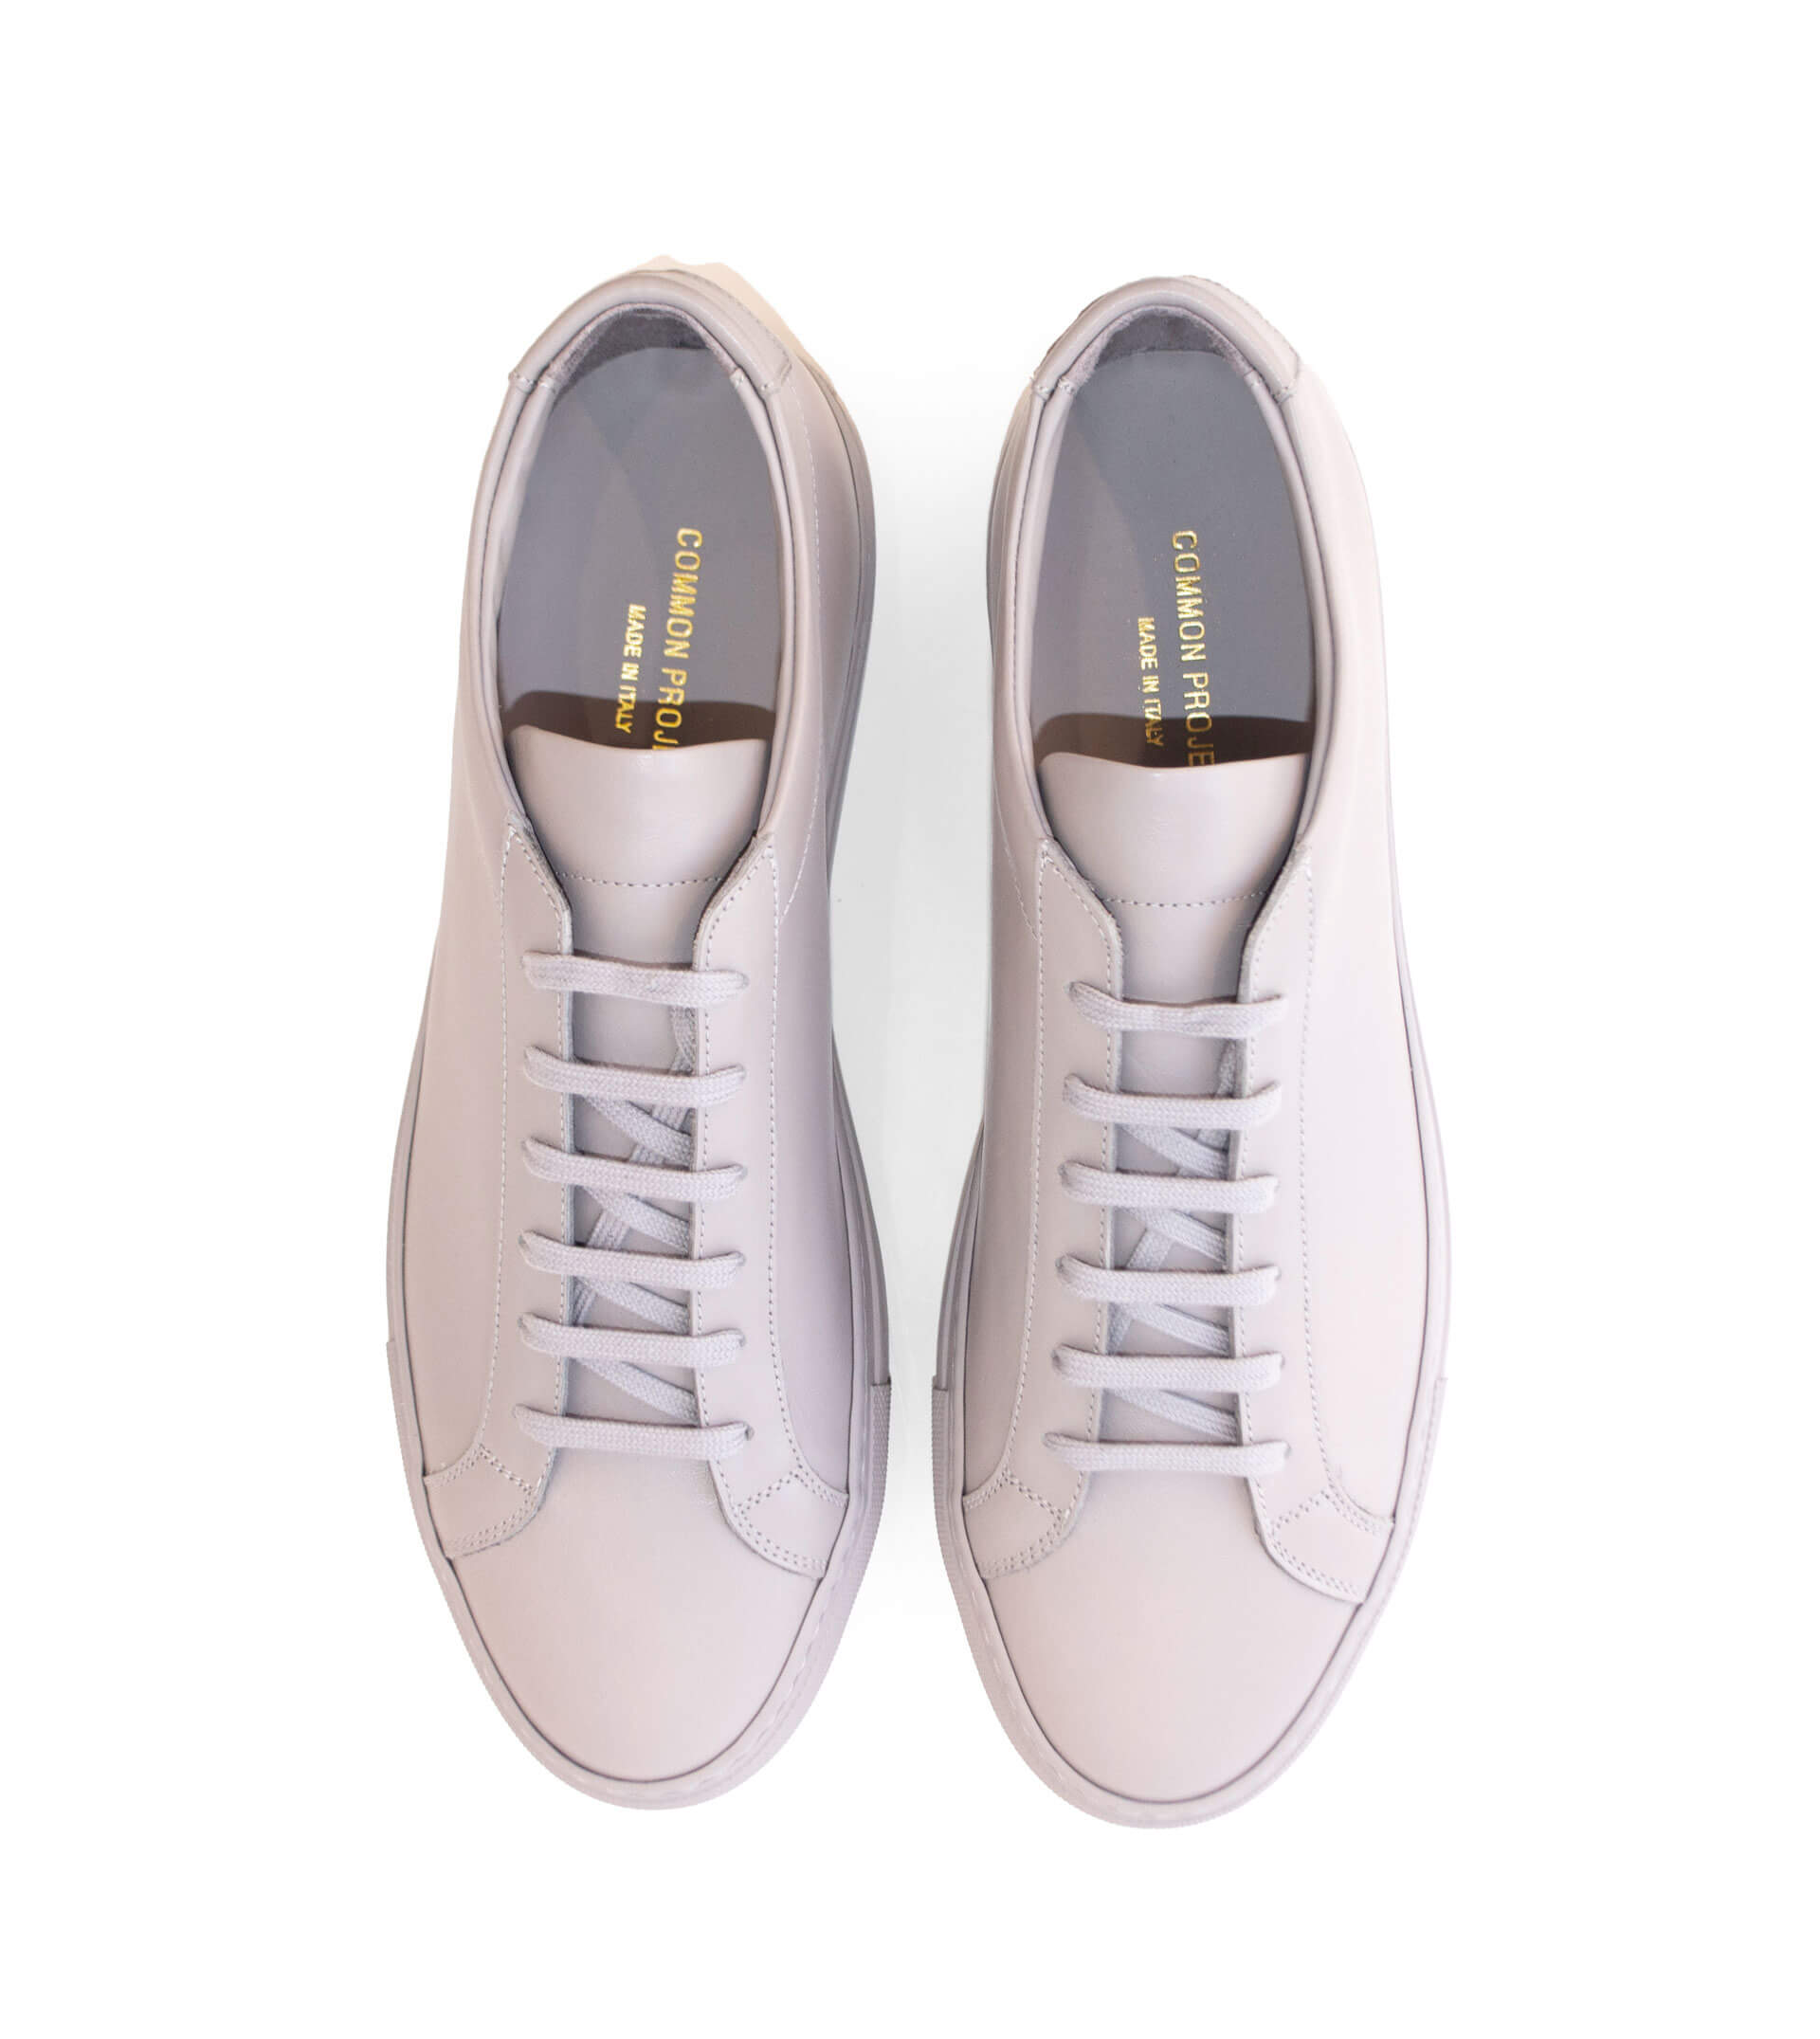 COMMON PROJECTS Original Leather Sneaker | Sam Malouf Authentic Luxury